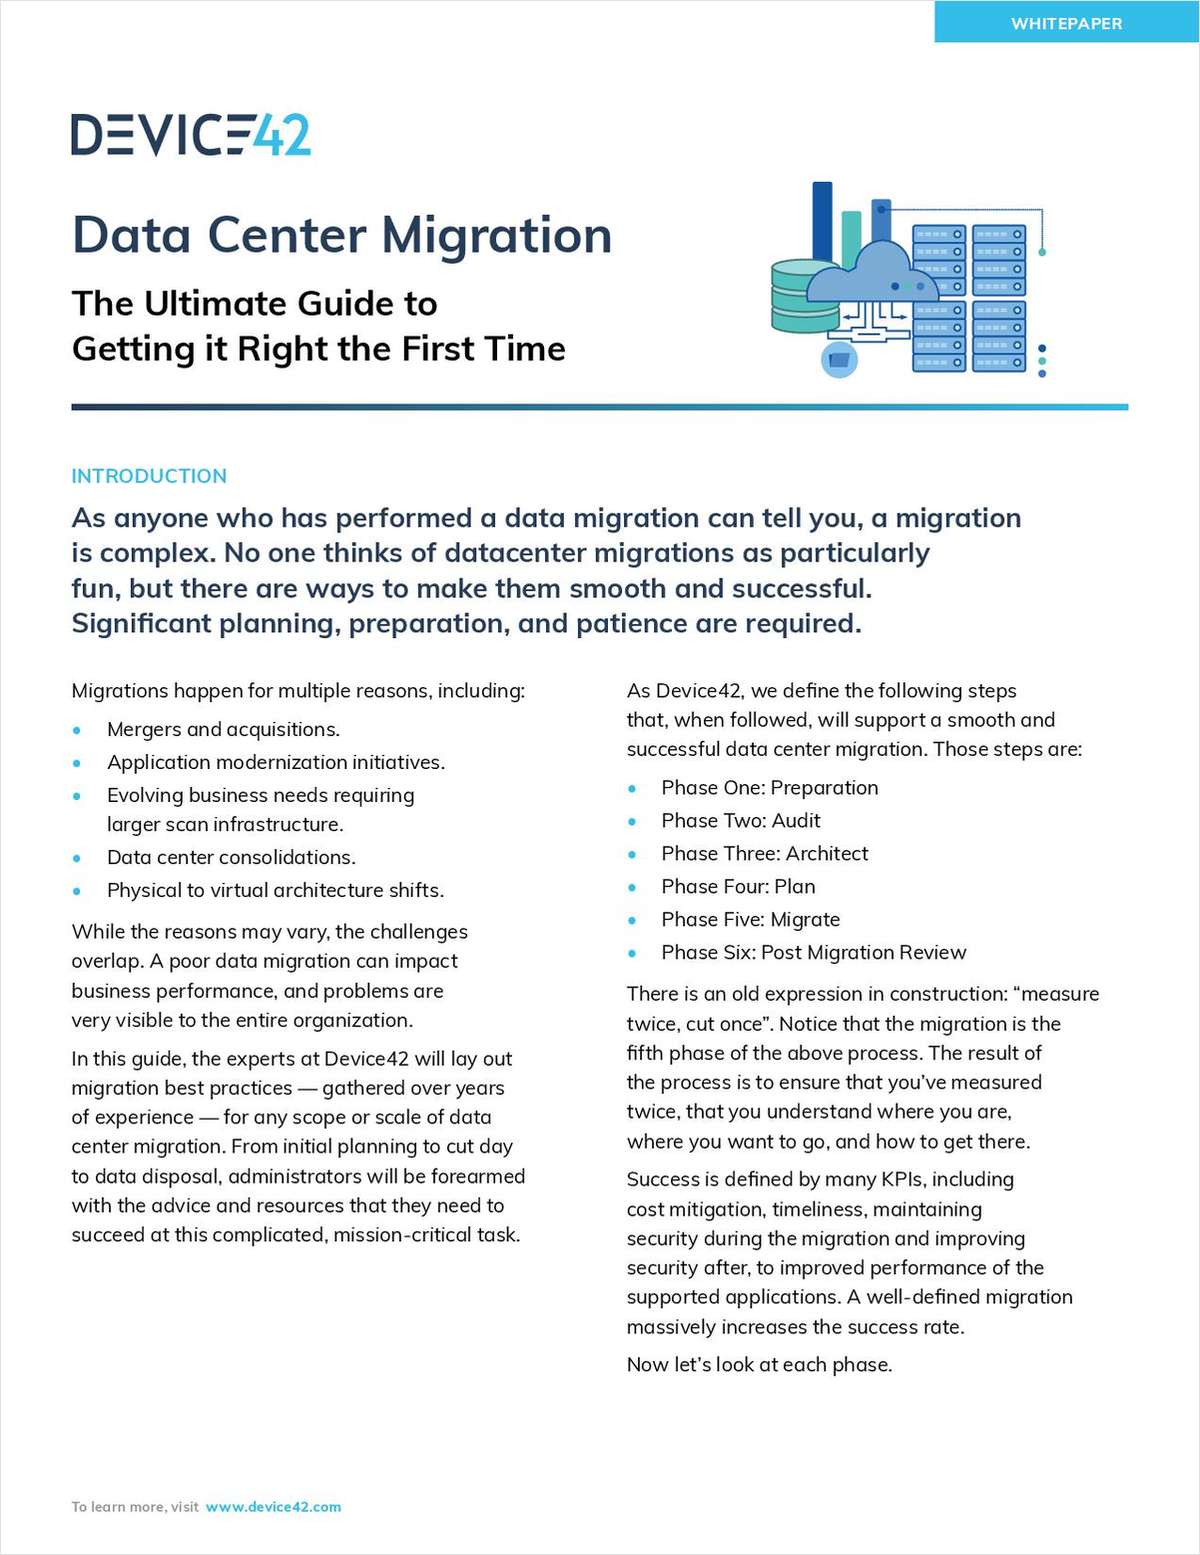 Data Center Migration: The Ultimate Guide  to Getting It Right